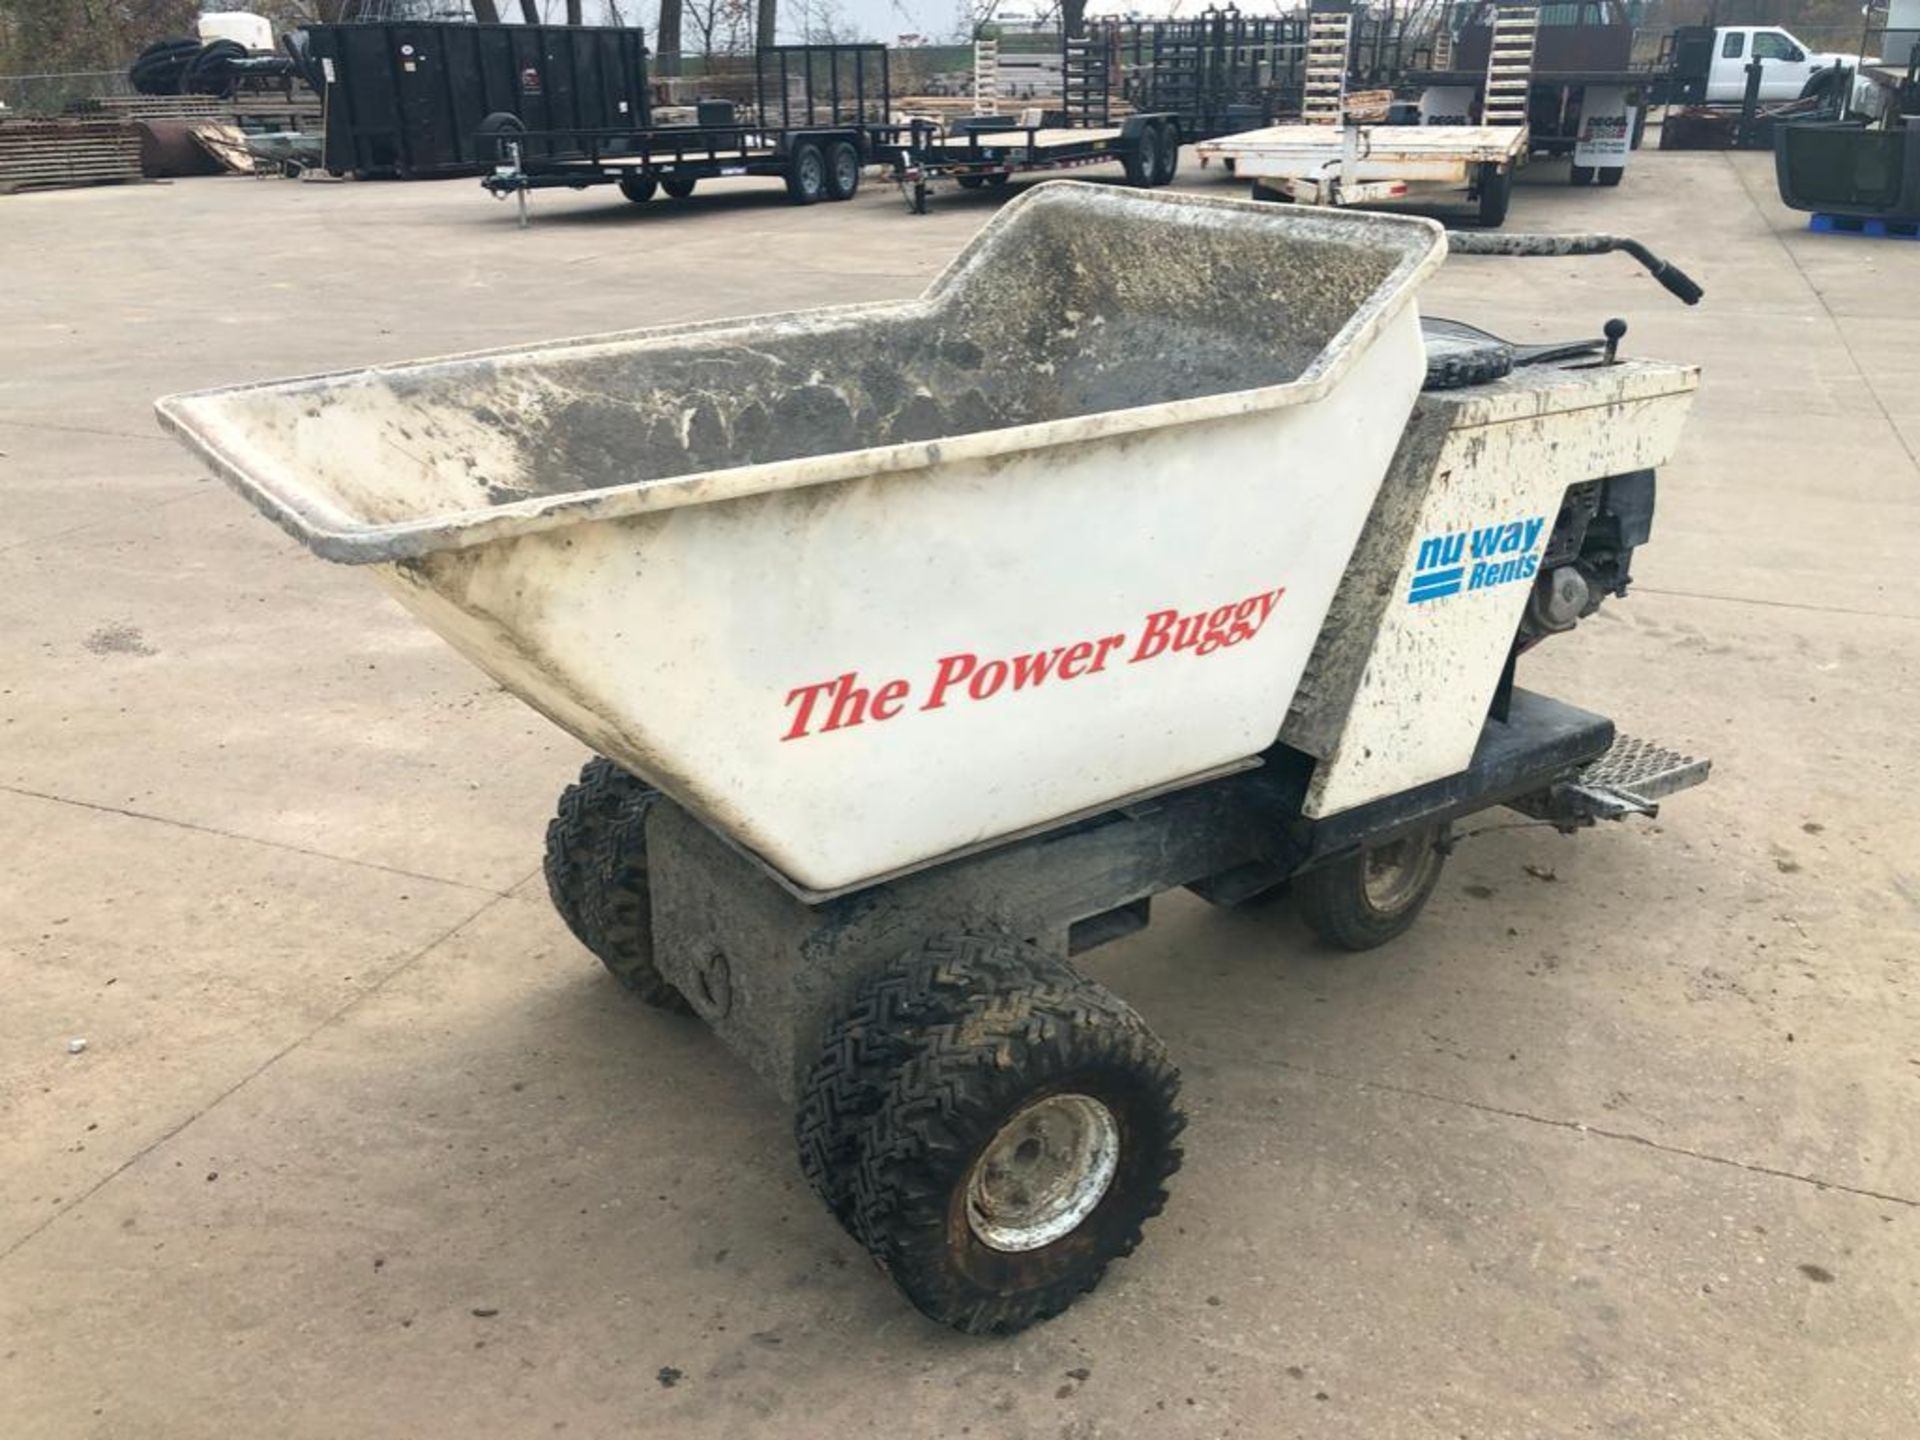 The Power Buggy Concrete Buggy. Located in Hazelwood, MO - Image 2 of 4